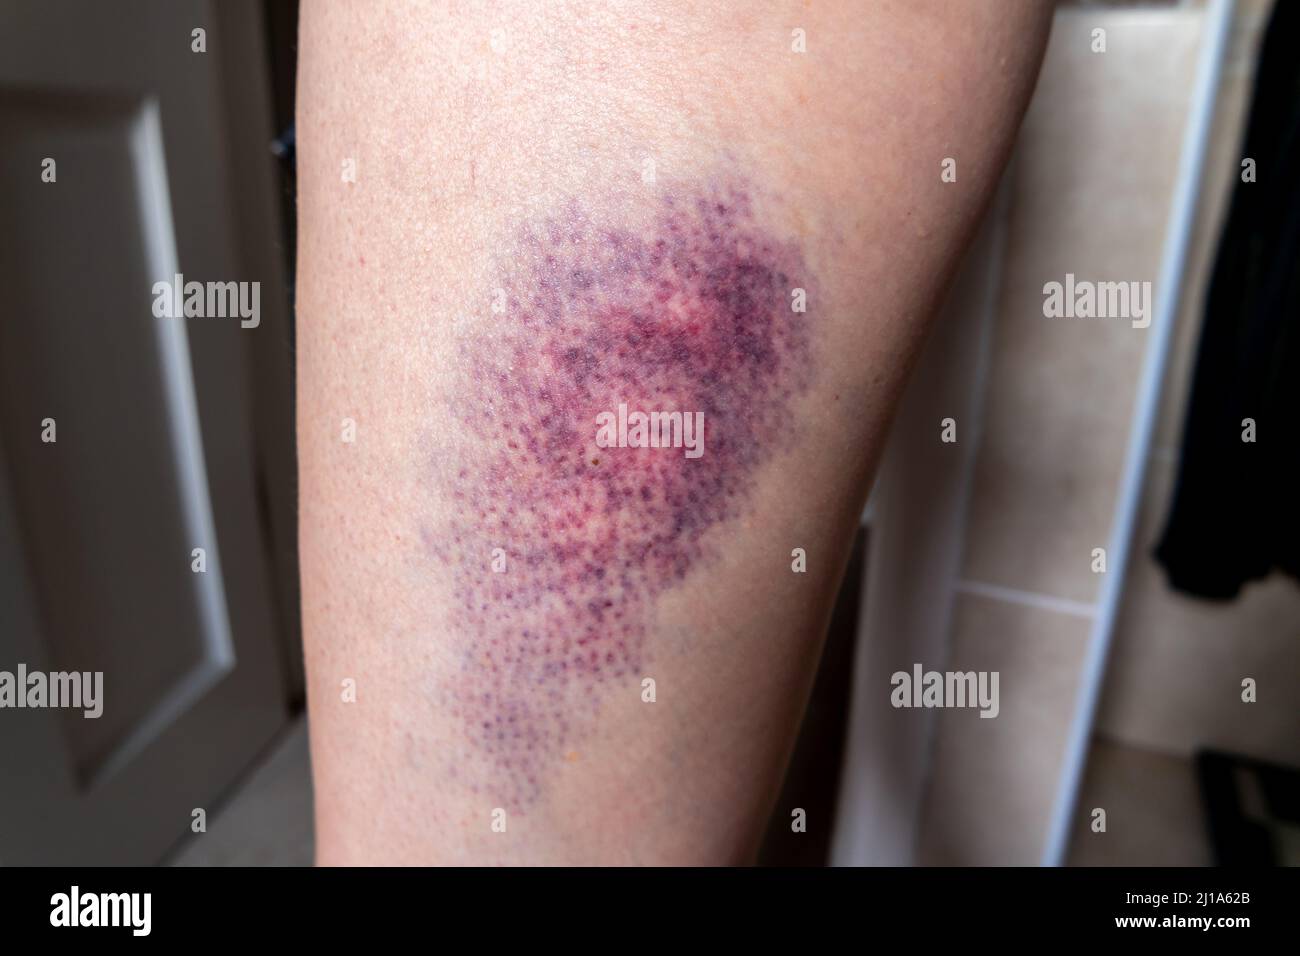 Terrible bruise on the upper leg of a woman. Stock Photo